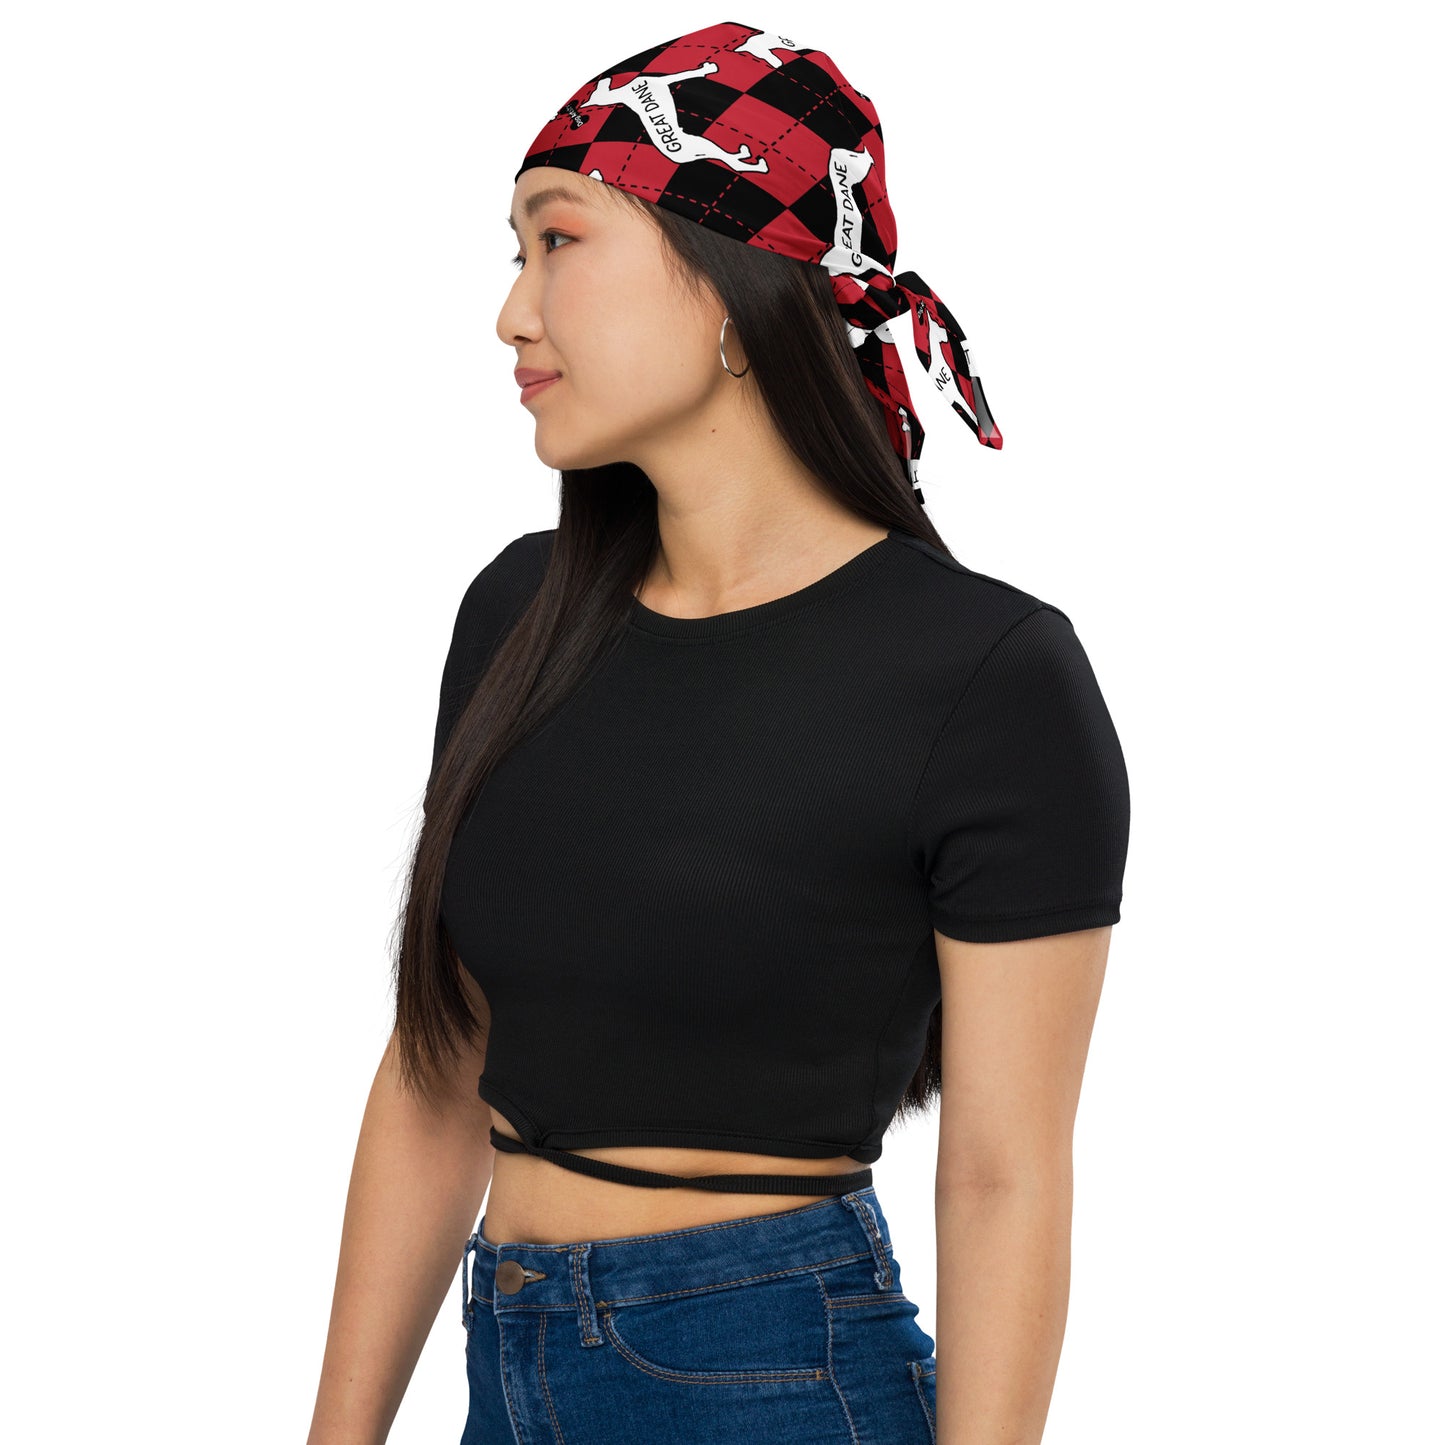 Great Dane Red and Black All-over print bandana